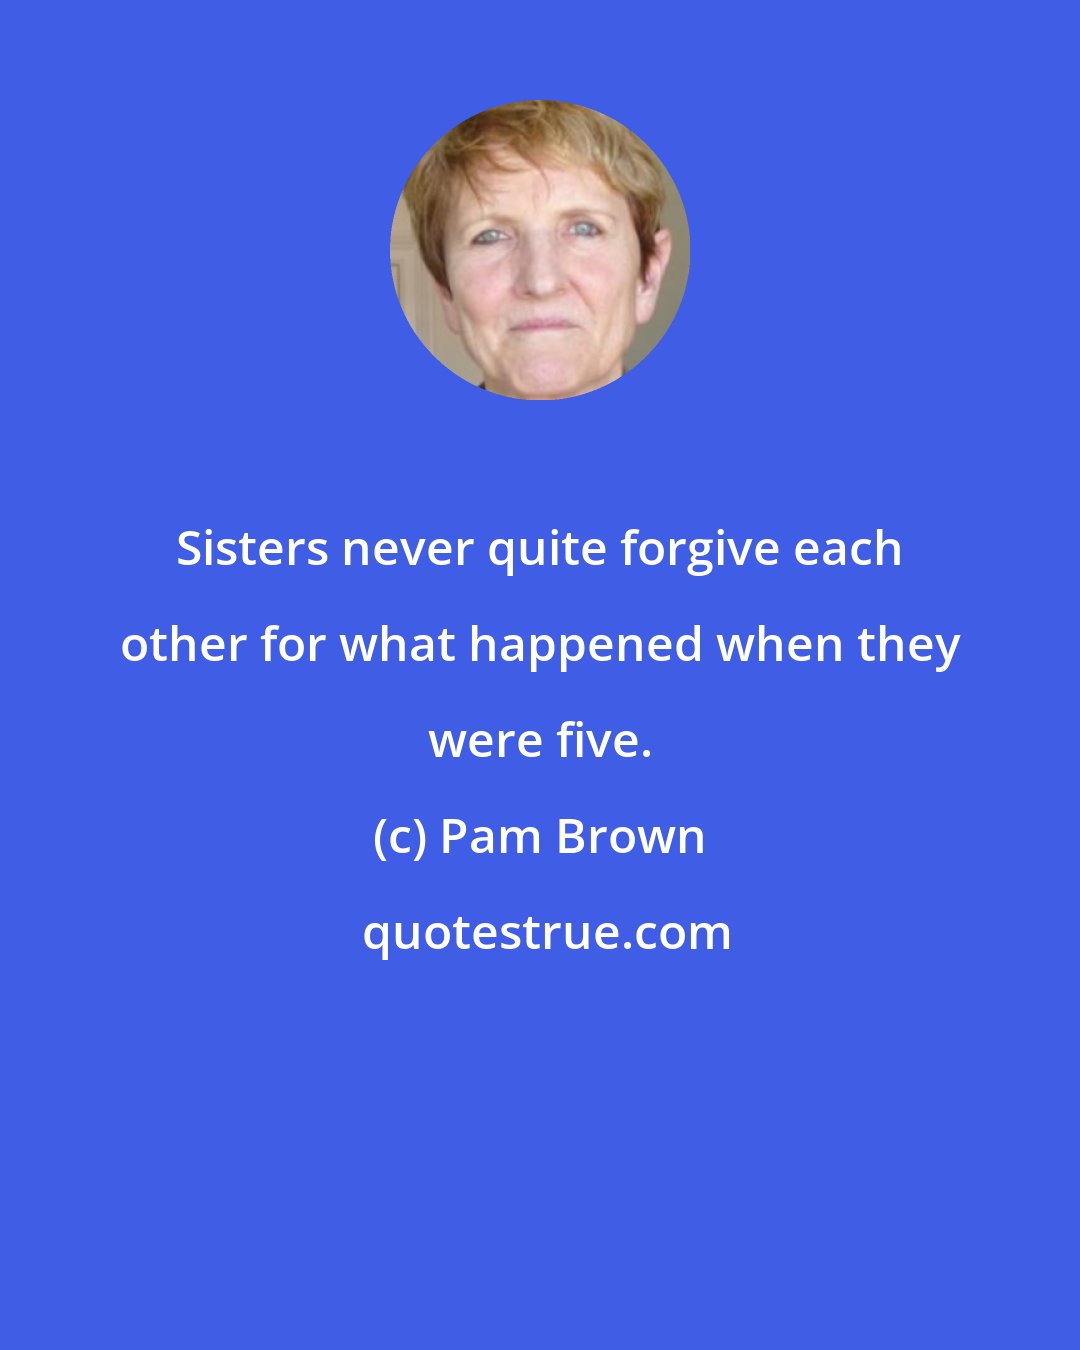 Pam Brown: Sisters never quite forgive each other for what happened when they were five.